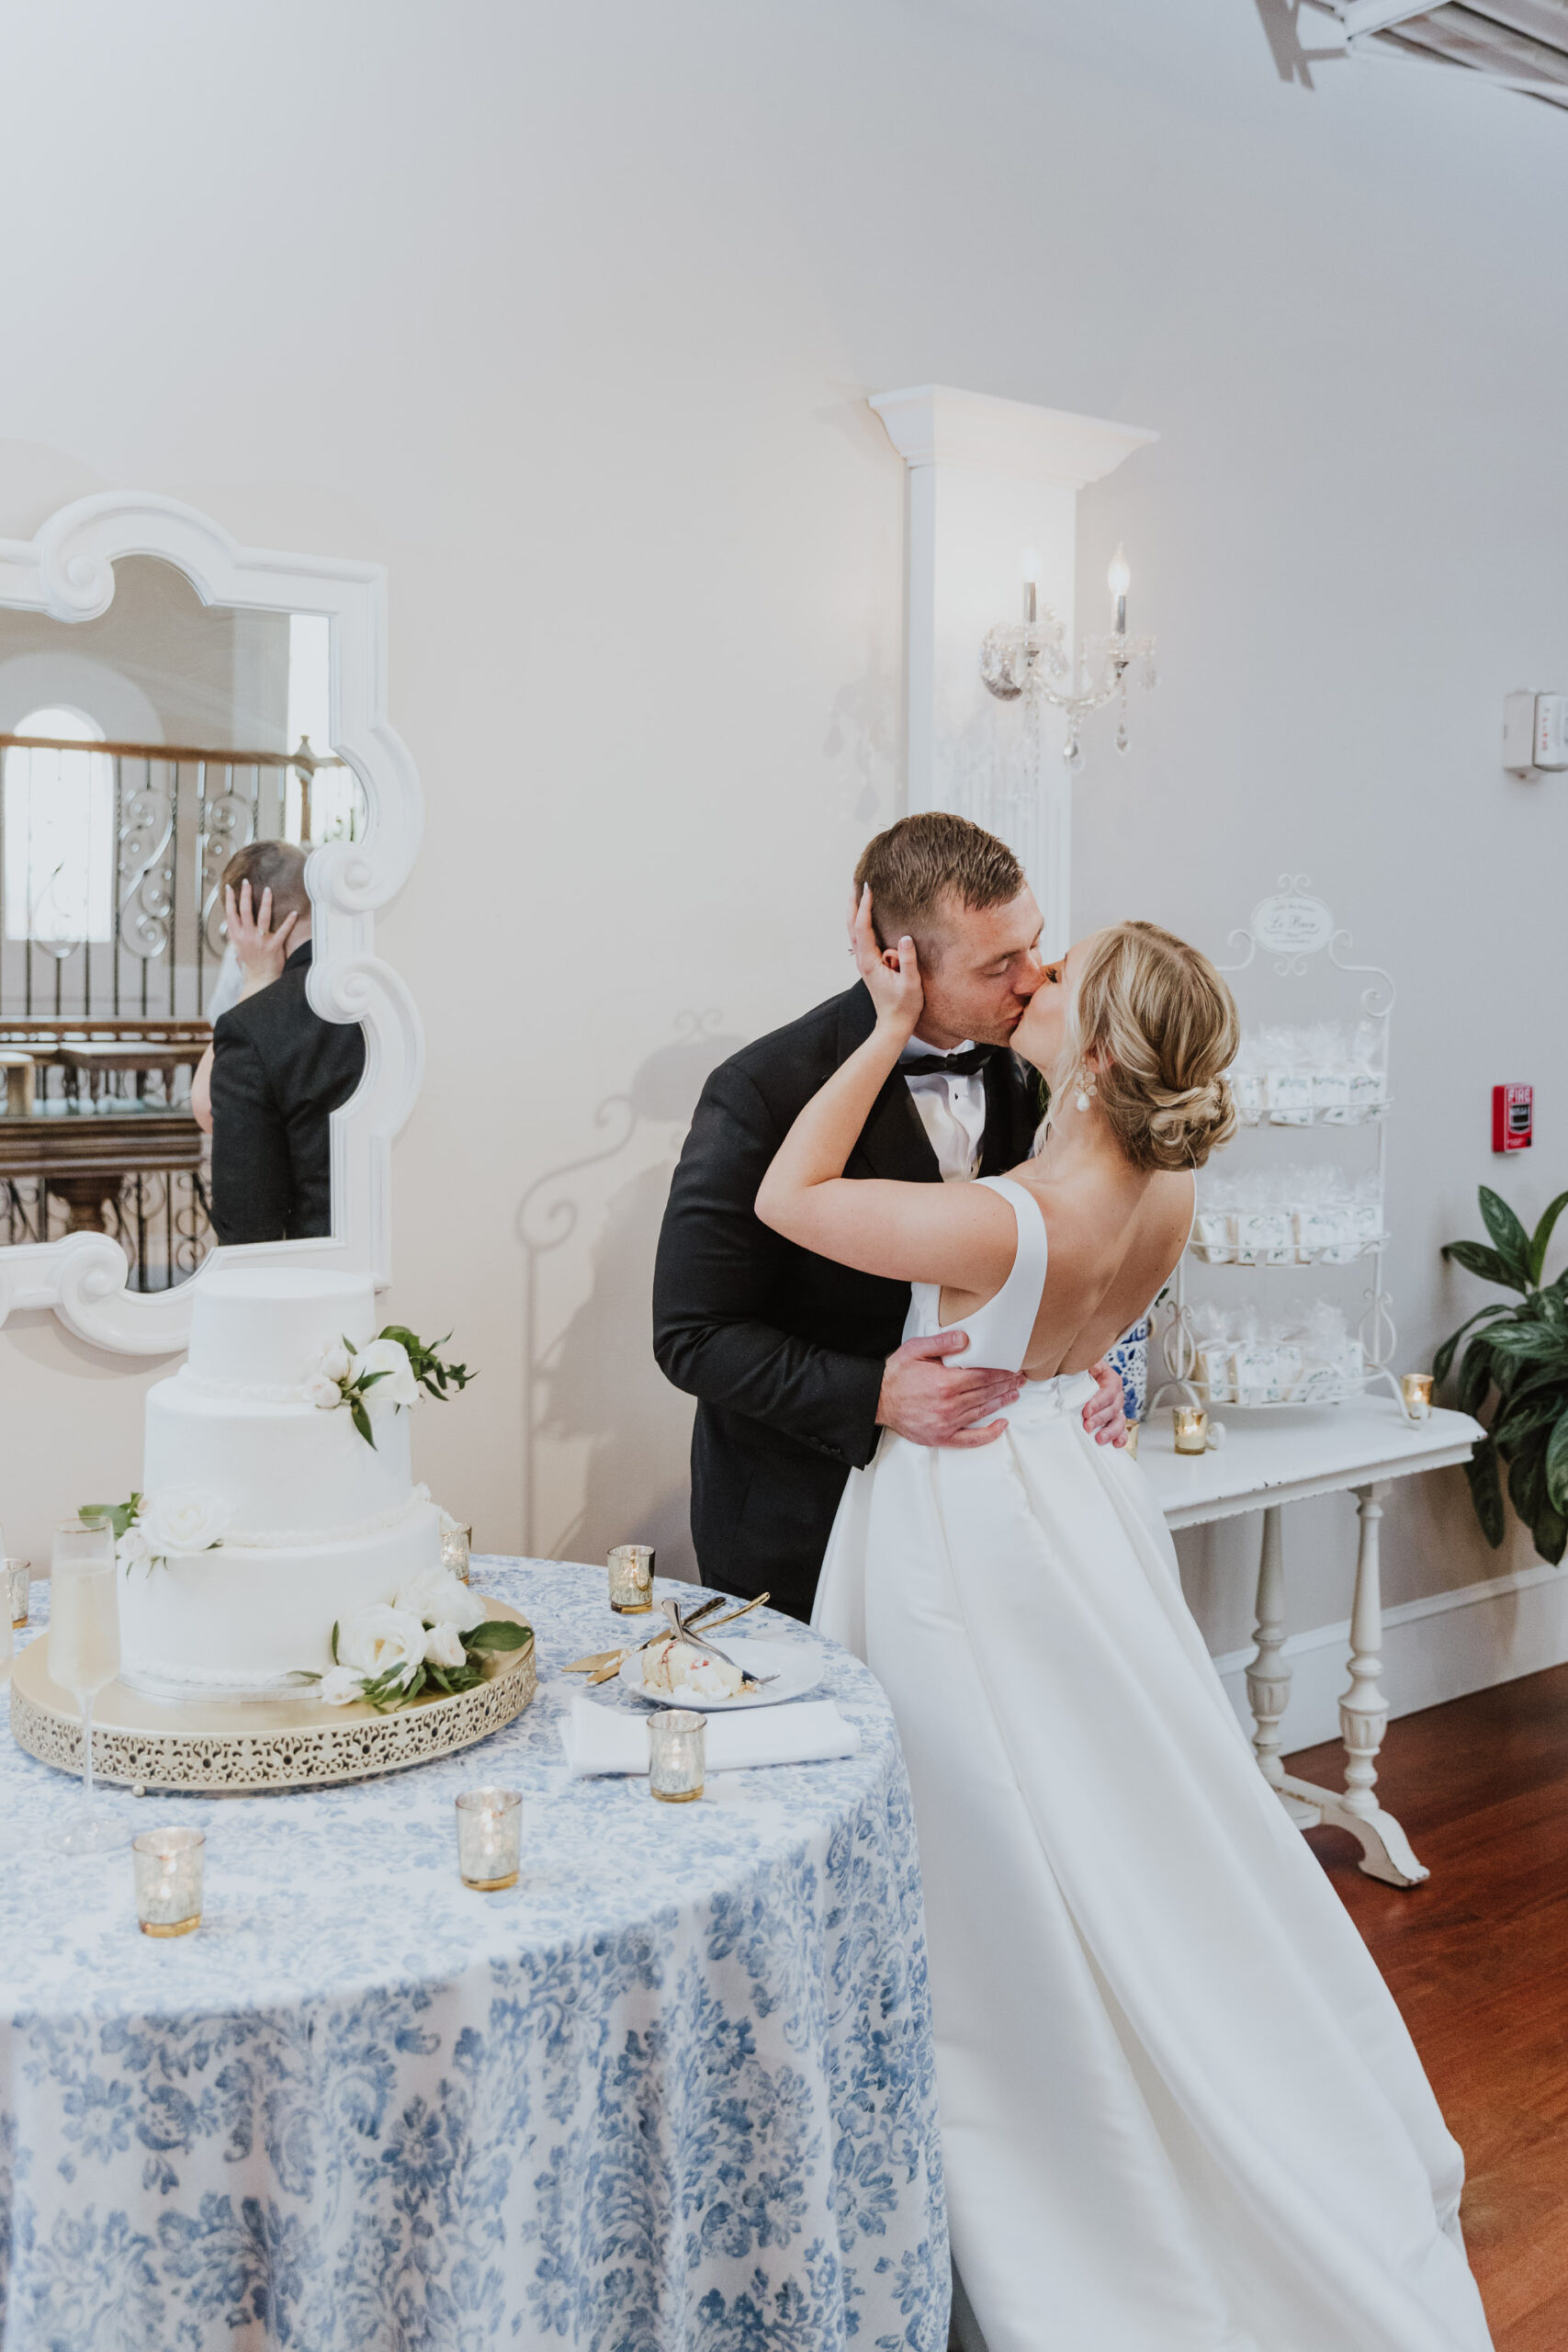 groom and bride kissing after cutting their cake in the white room loft reception space